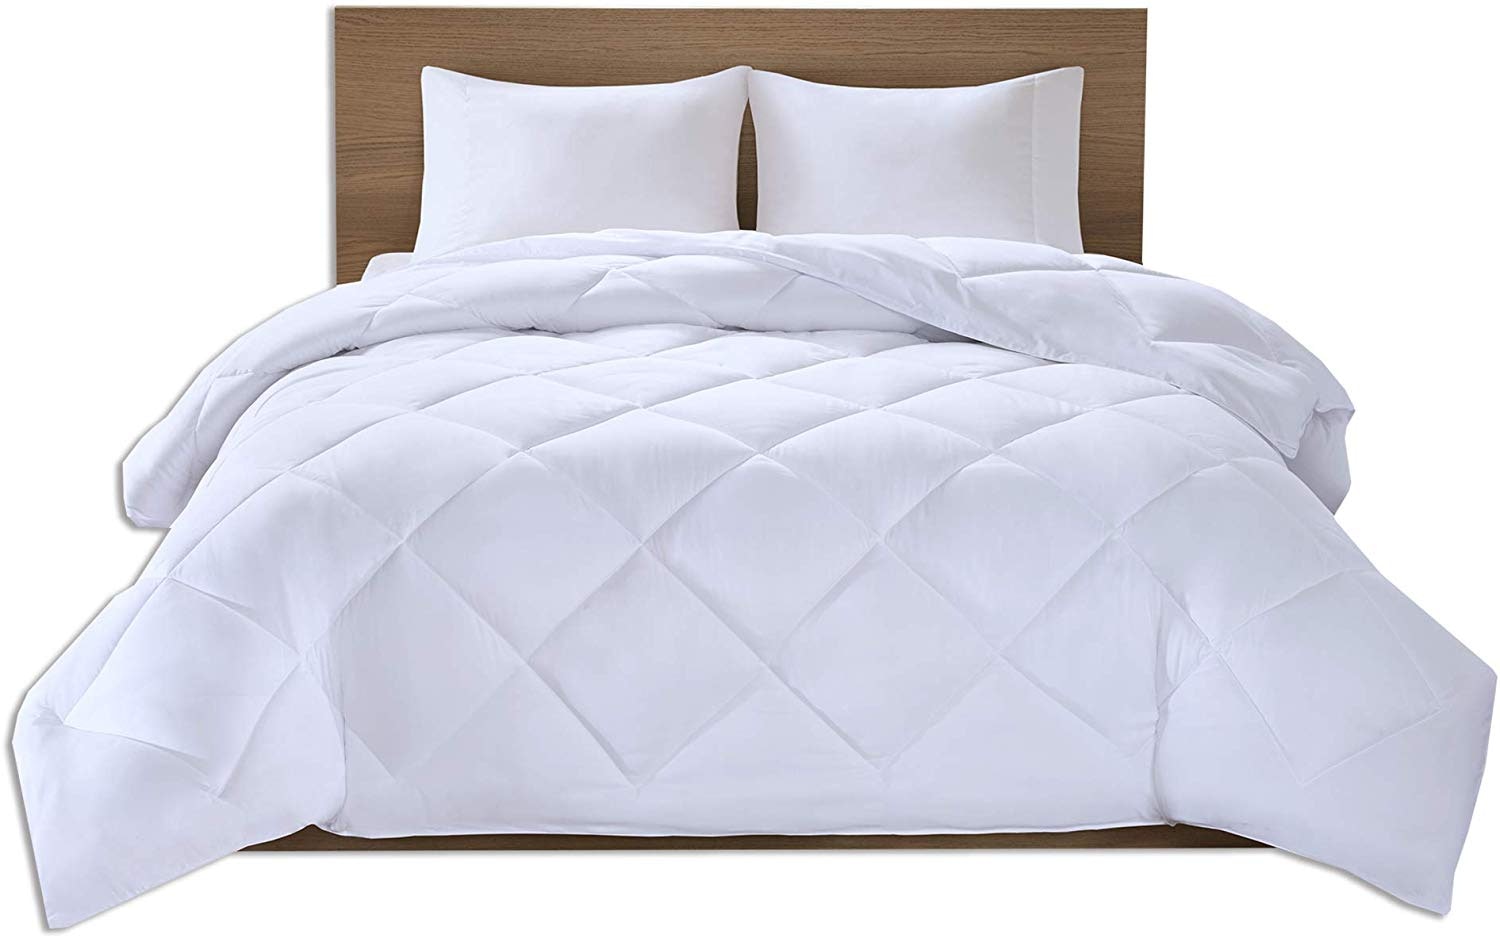 The 7 Best Comforters To Keep You Cool All Night